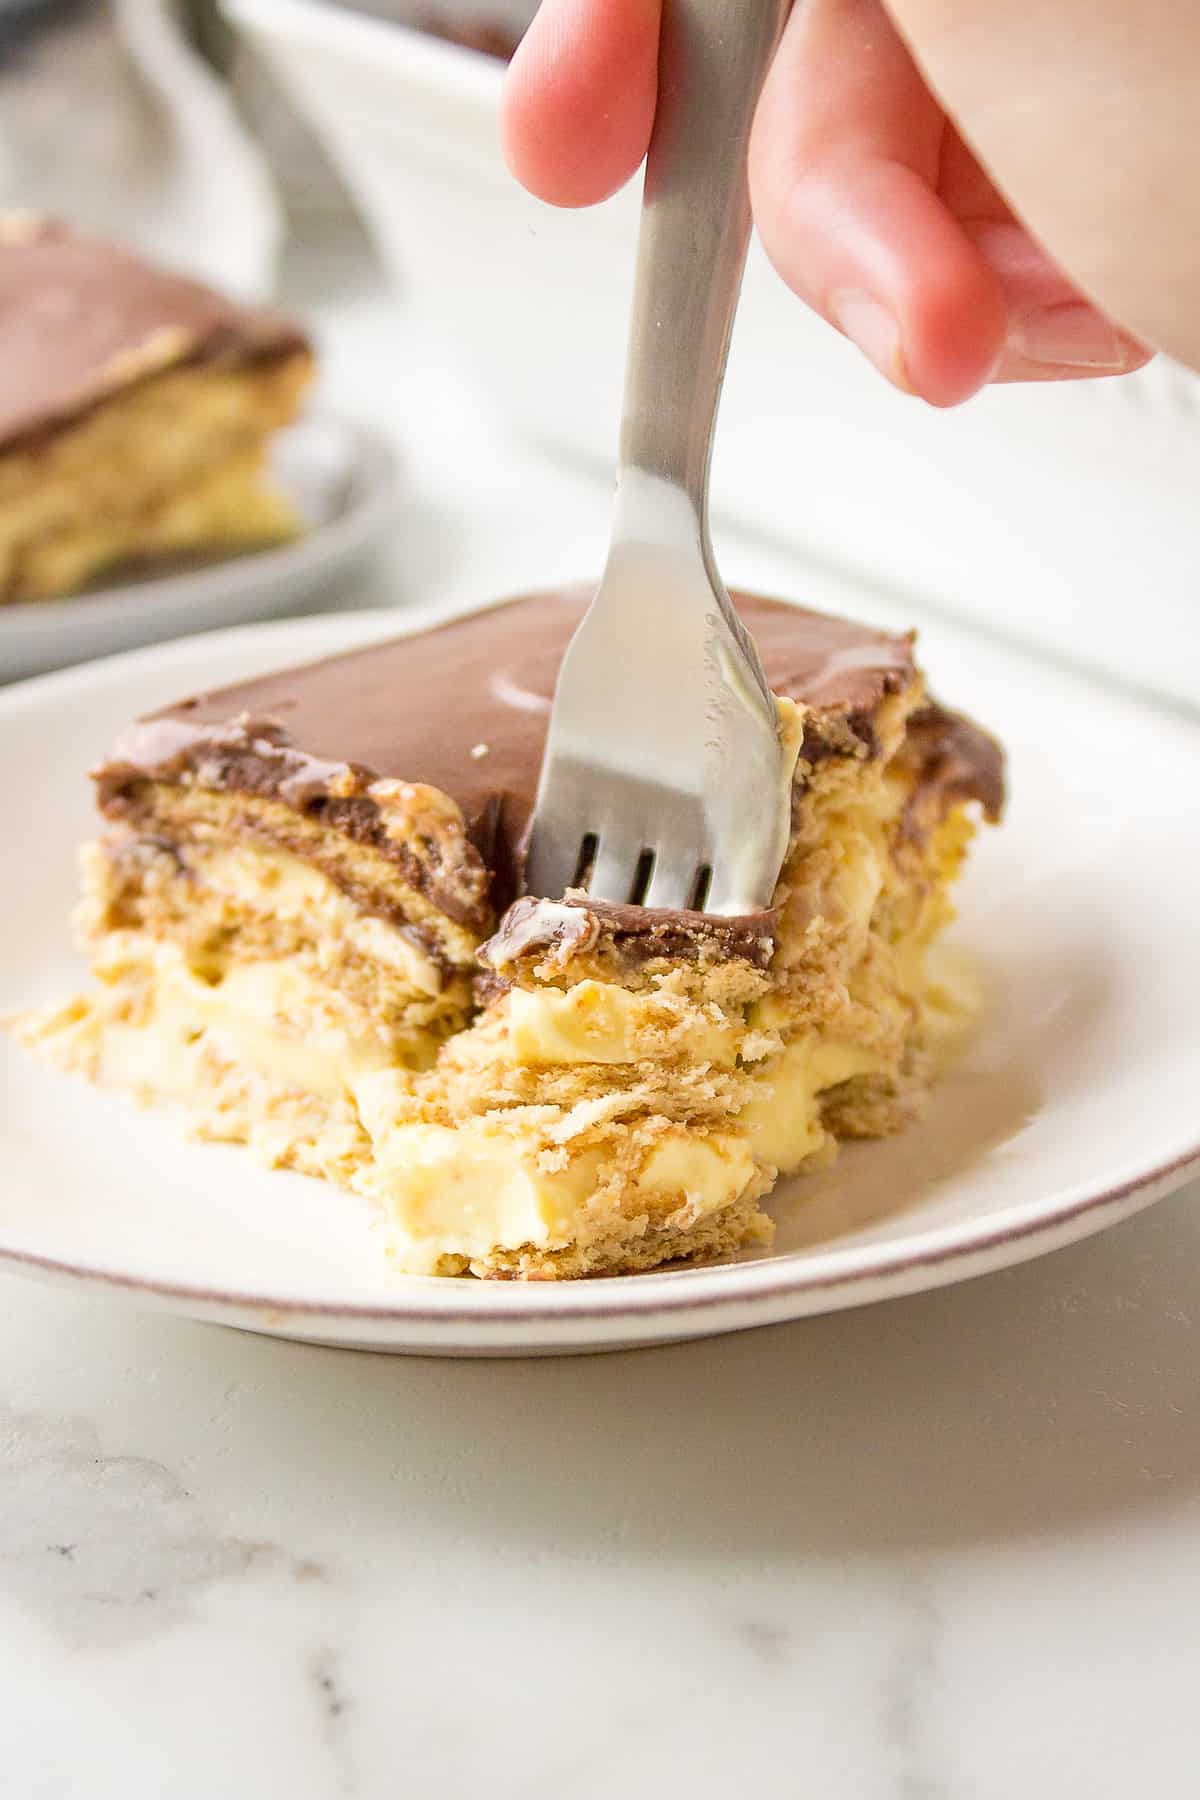 fork digging into no bake chocolate eclair cake served on a plate